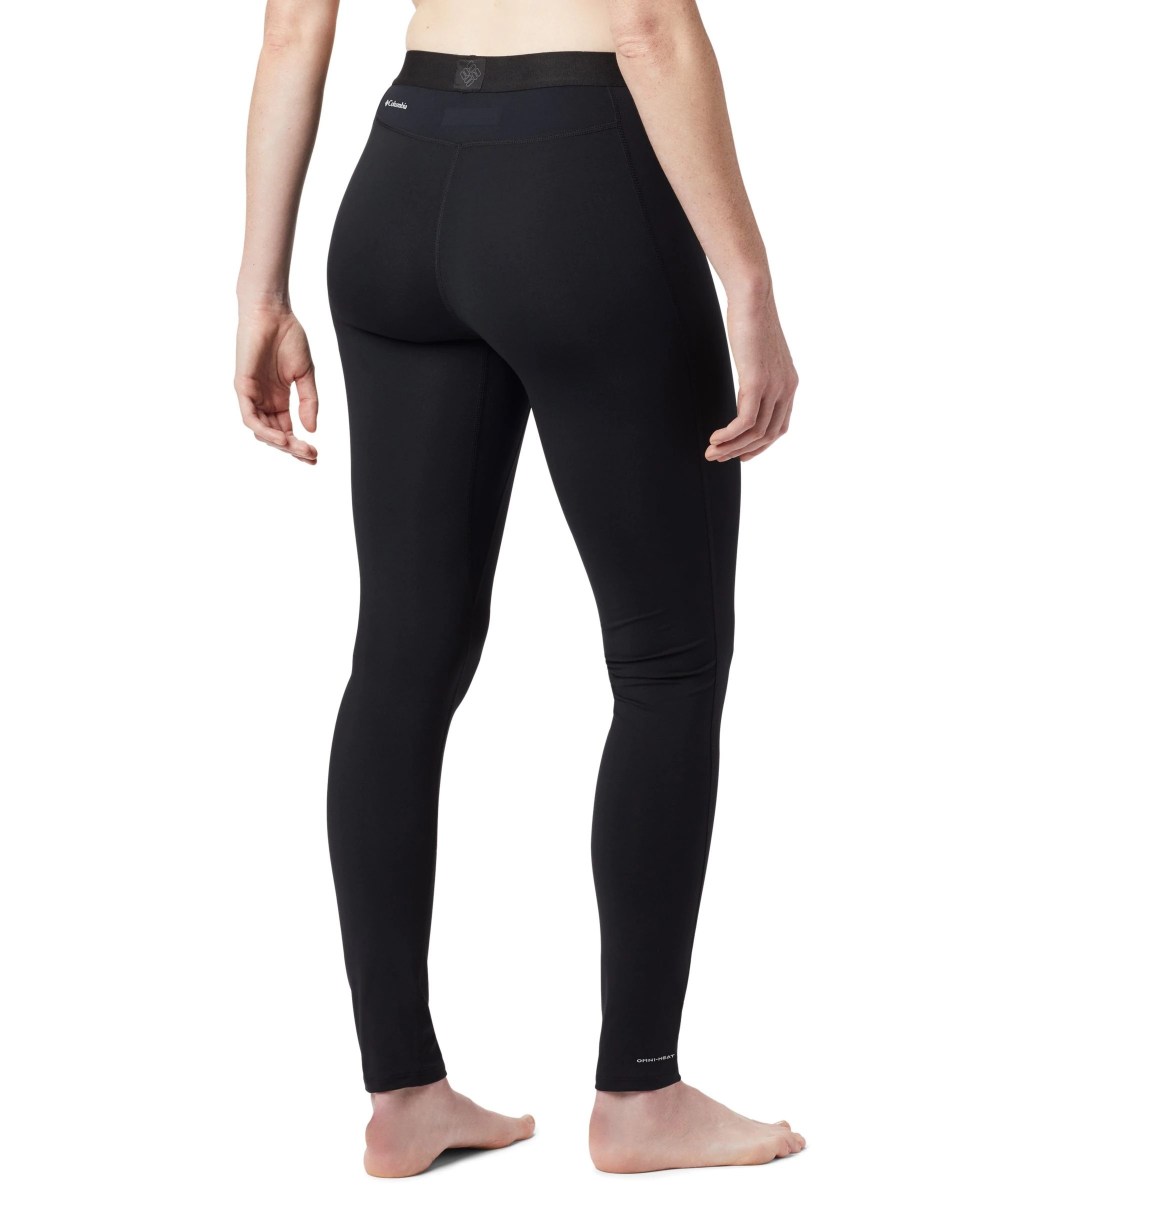 LEGGINS MIDWEIGHT STRETCH TIGHT FEATURES Omni-HEAT Omni-WICK FABRICS 85% polyester / 15% elastane BLACK